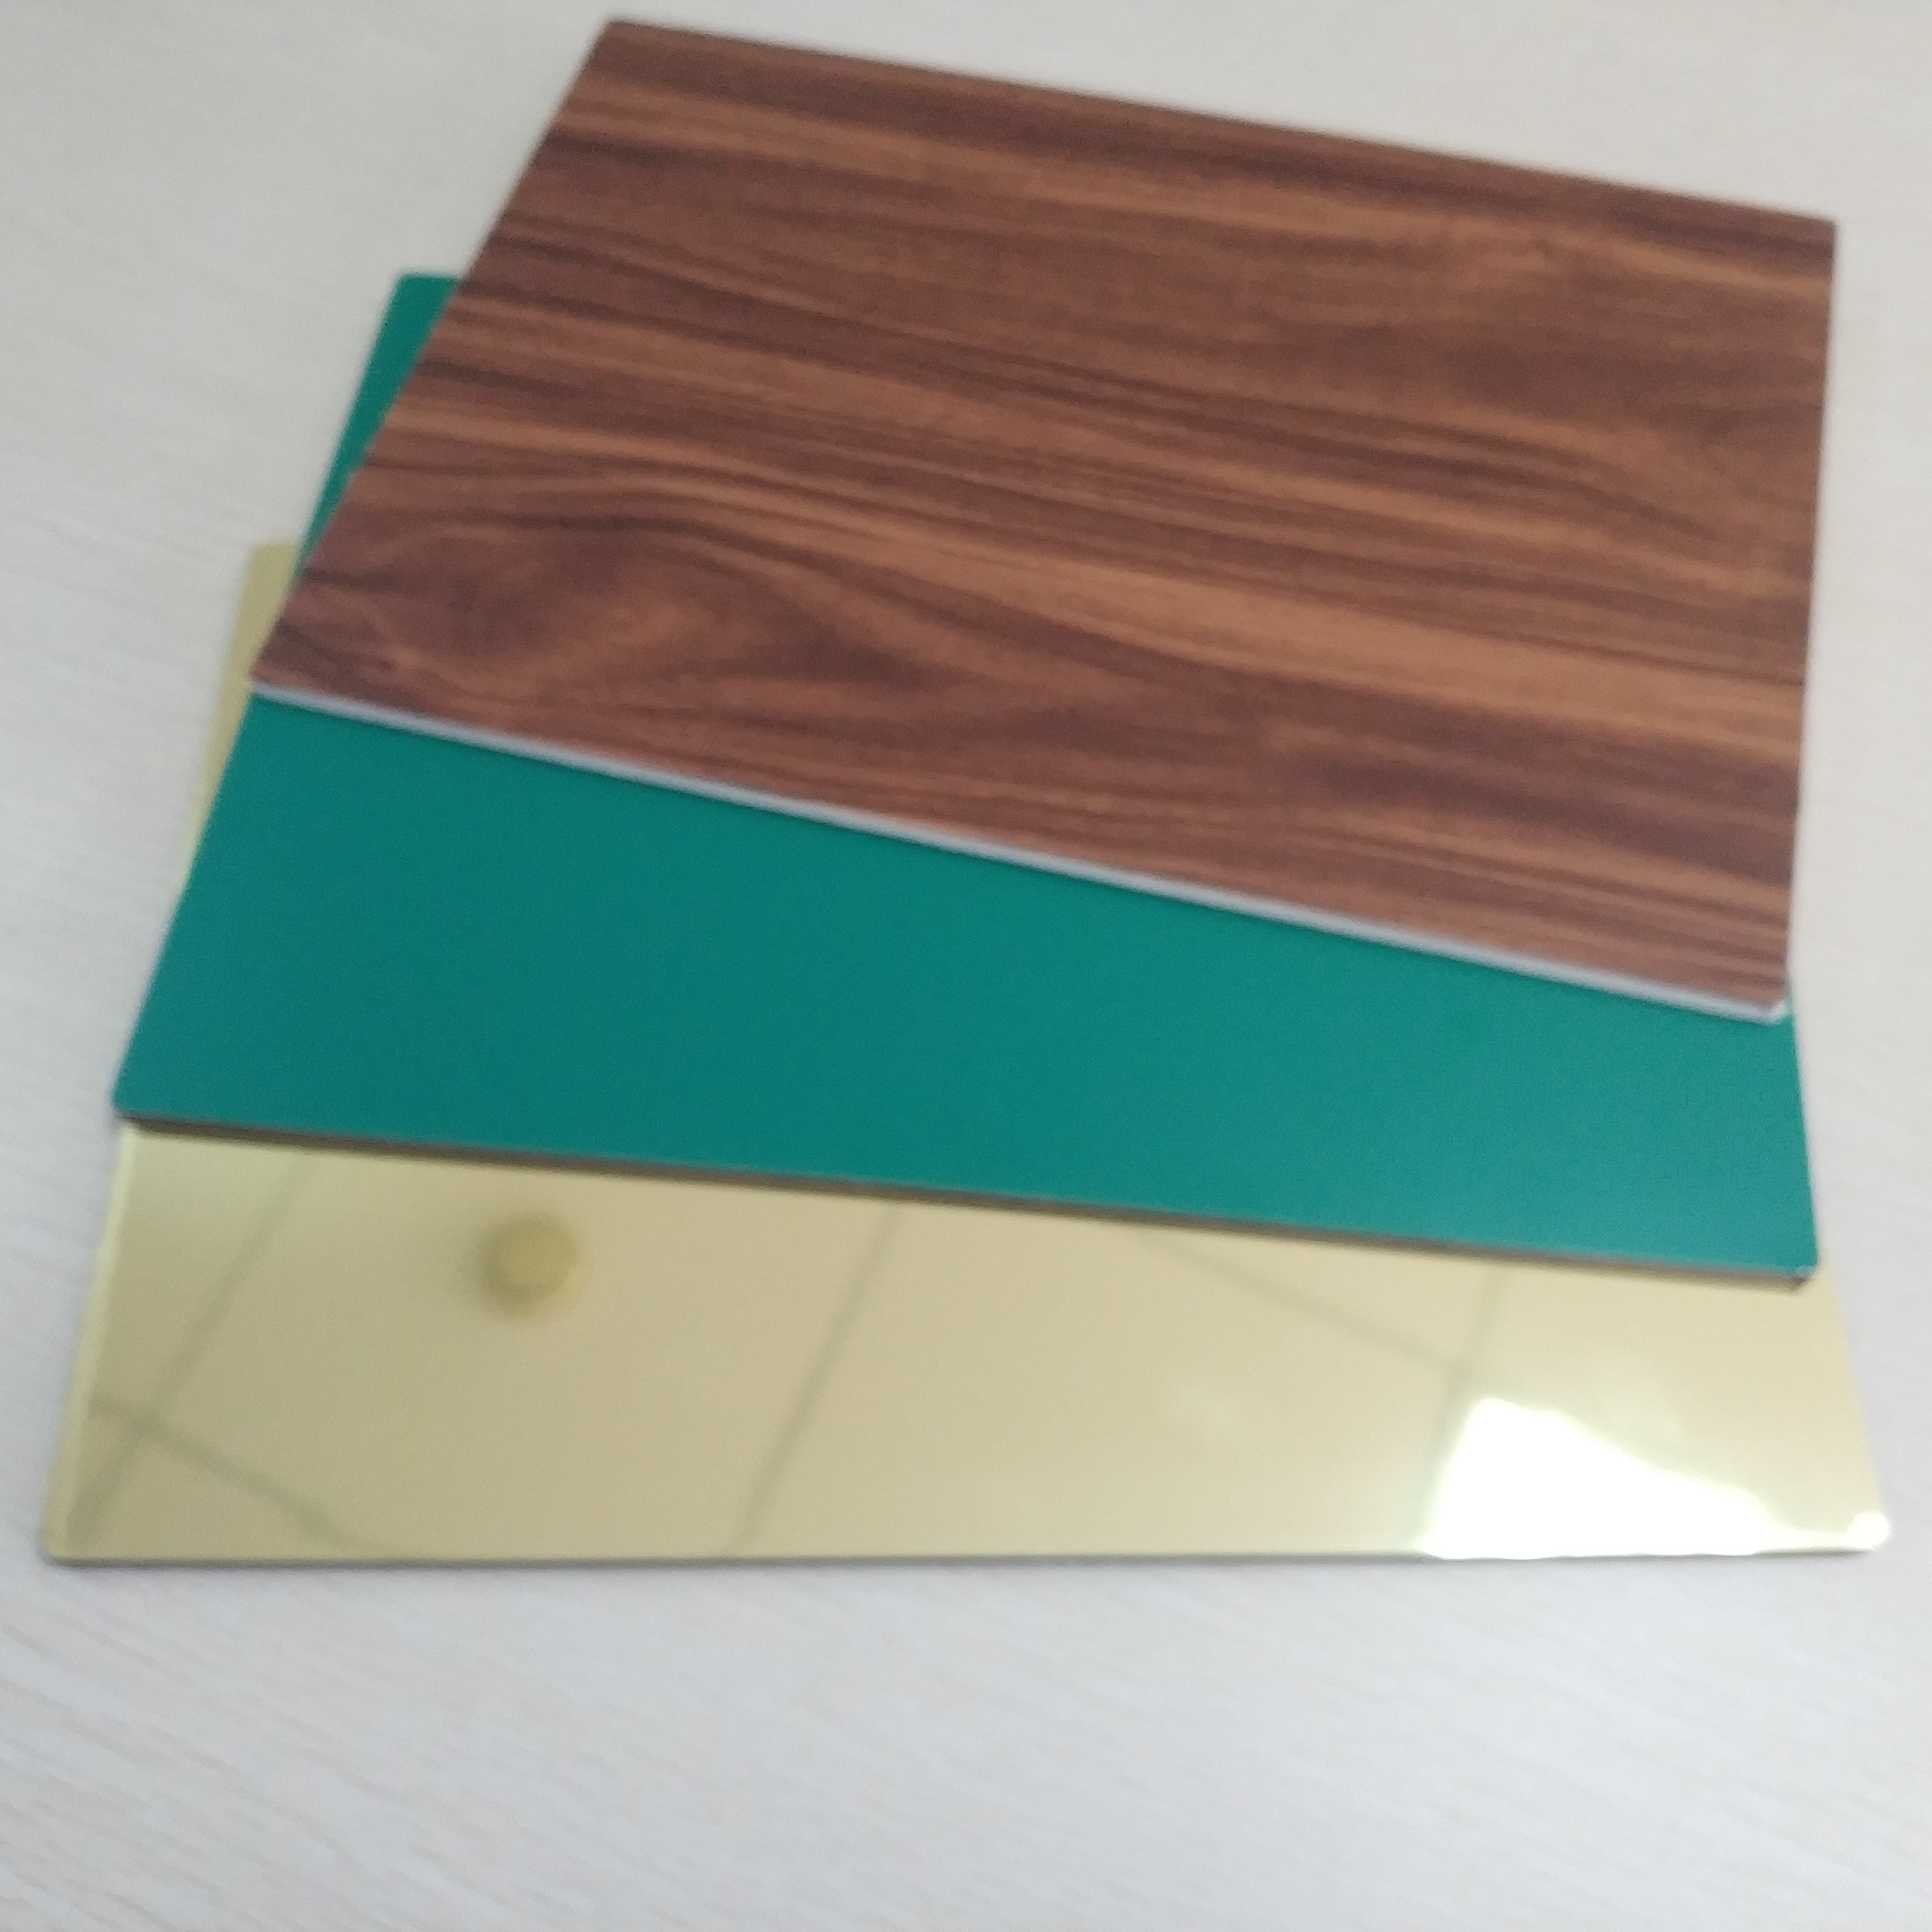  Bended Wood Grain Aluminum Composite Panel For Exterior Building Roof Manufactures